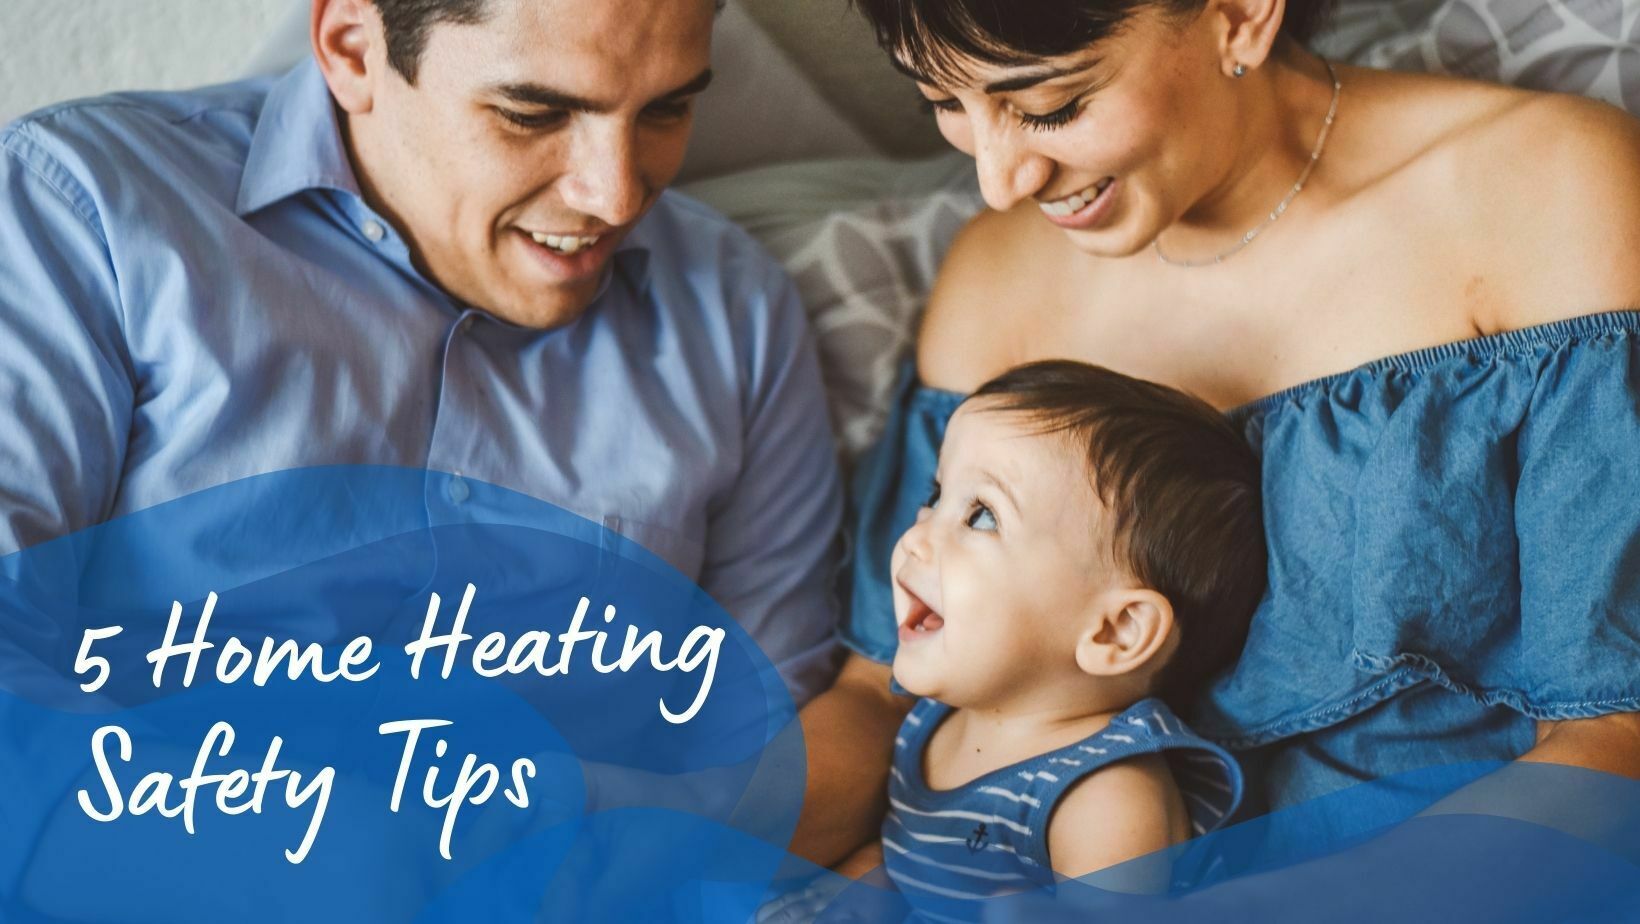 5 Home Heating Safety Tips